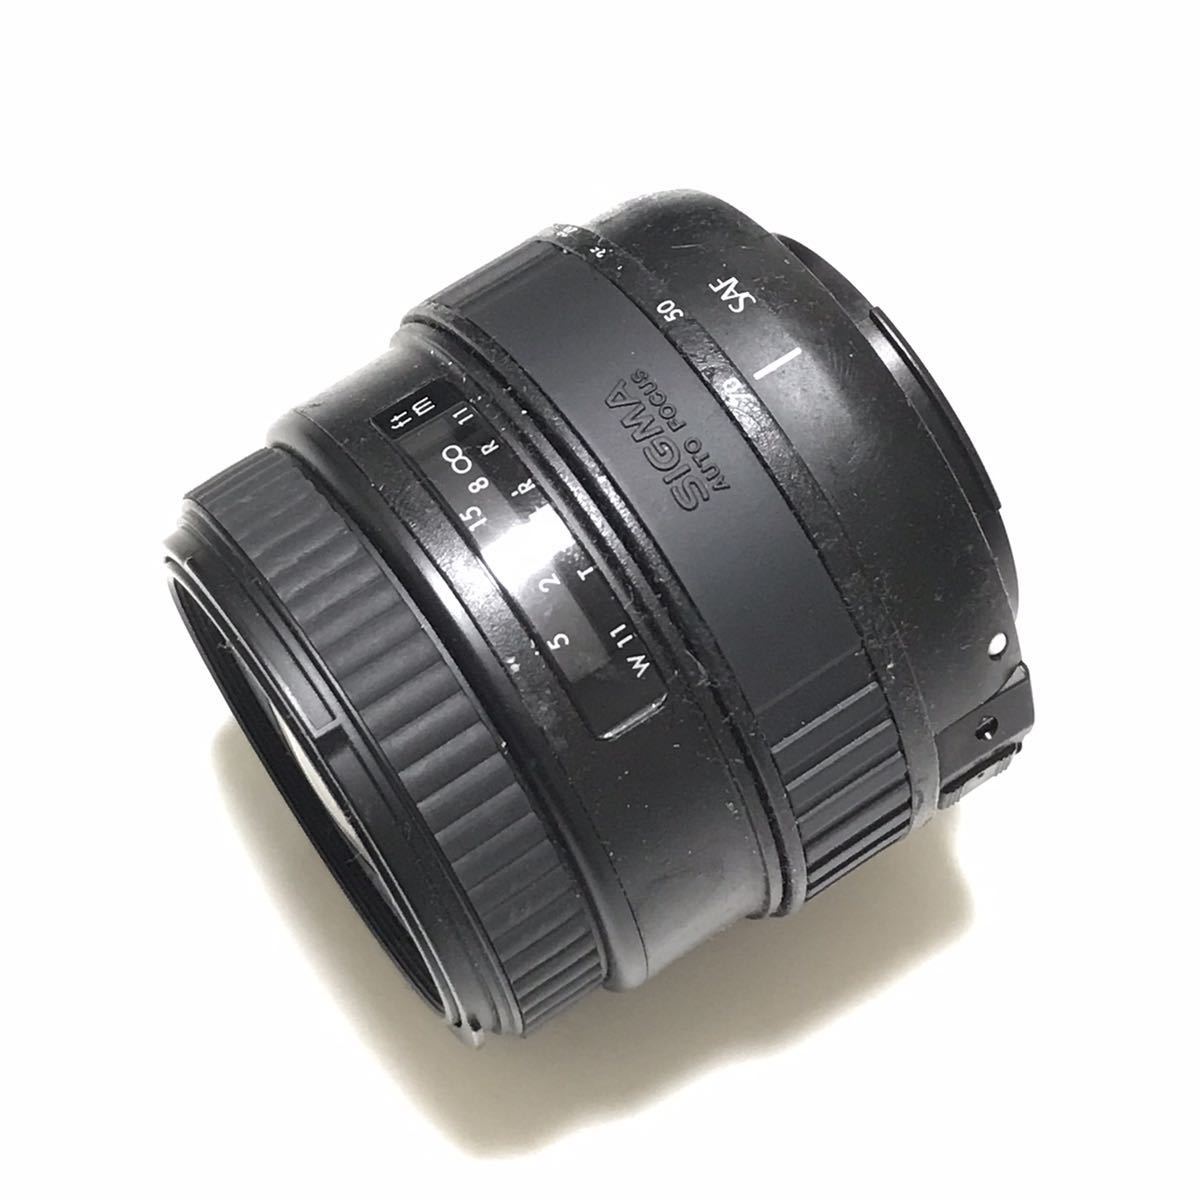 Sigma シグマ 28-70mm f/3.5-4.5 AF Zoom Lens For Canon EF EOS用 キャノン ズームレンズ_画像2